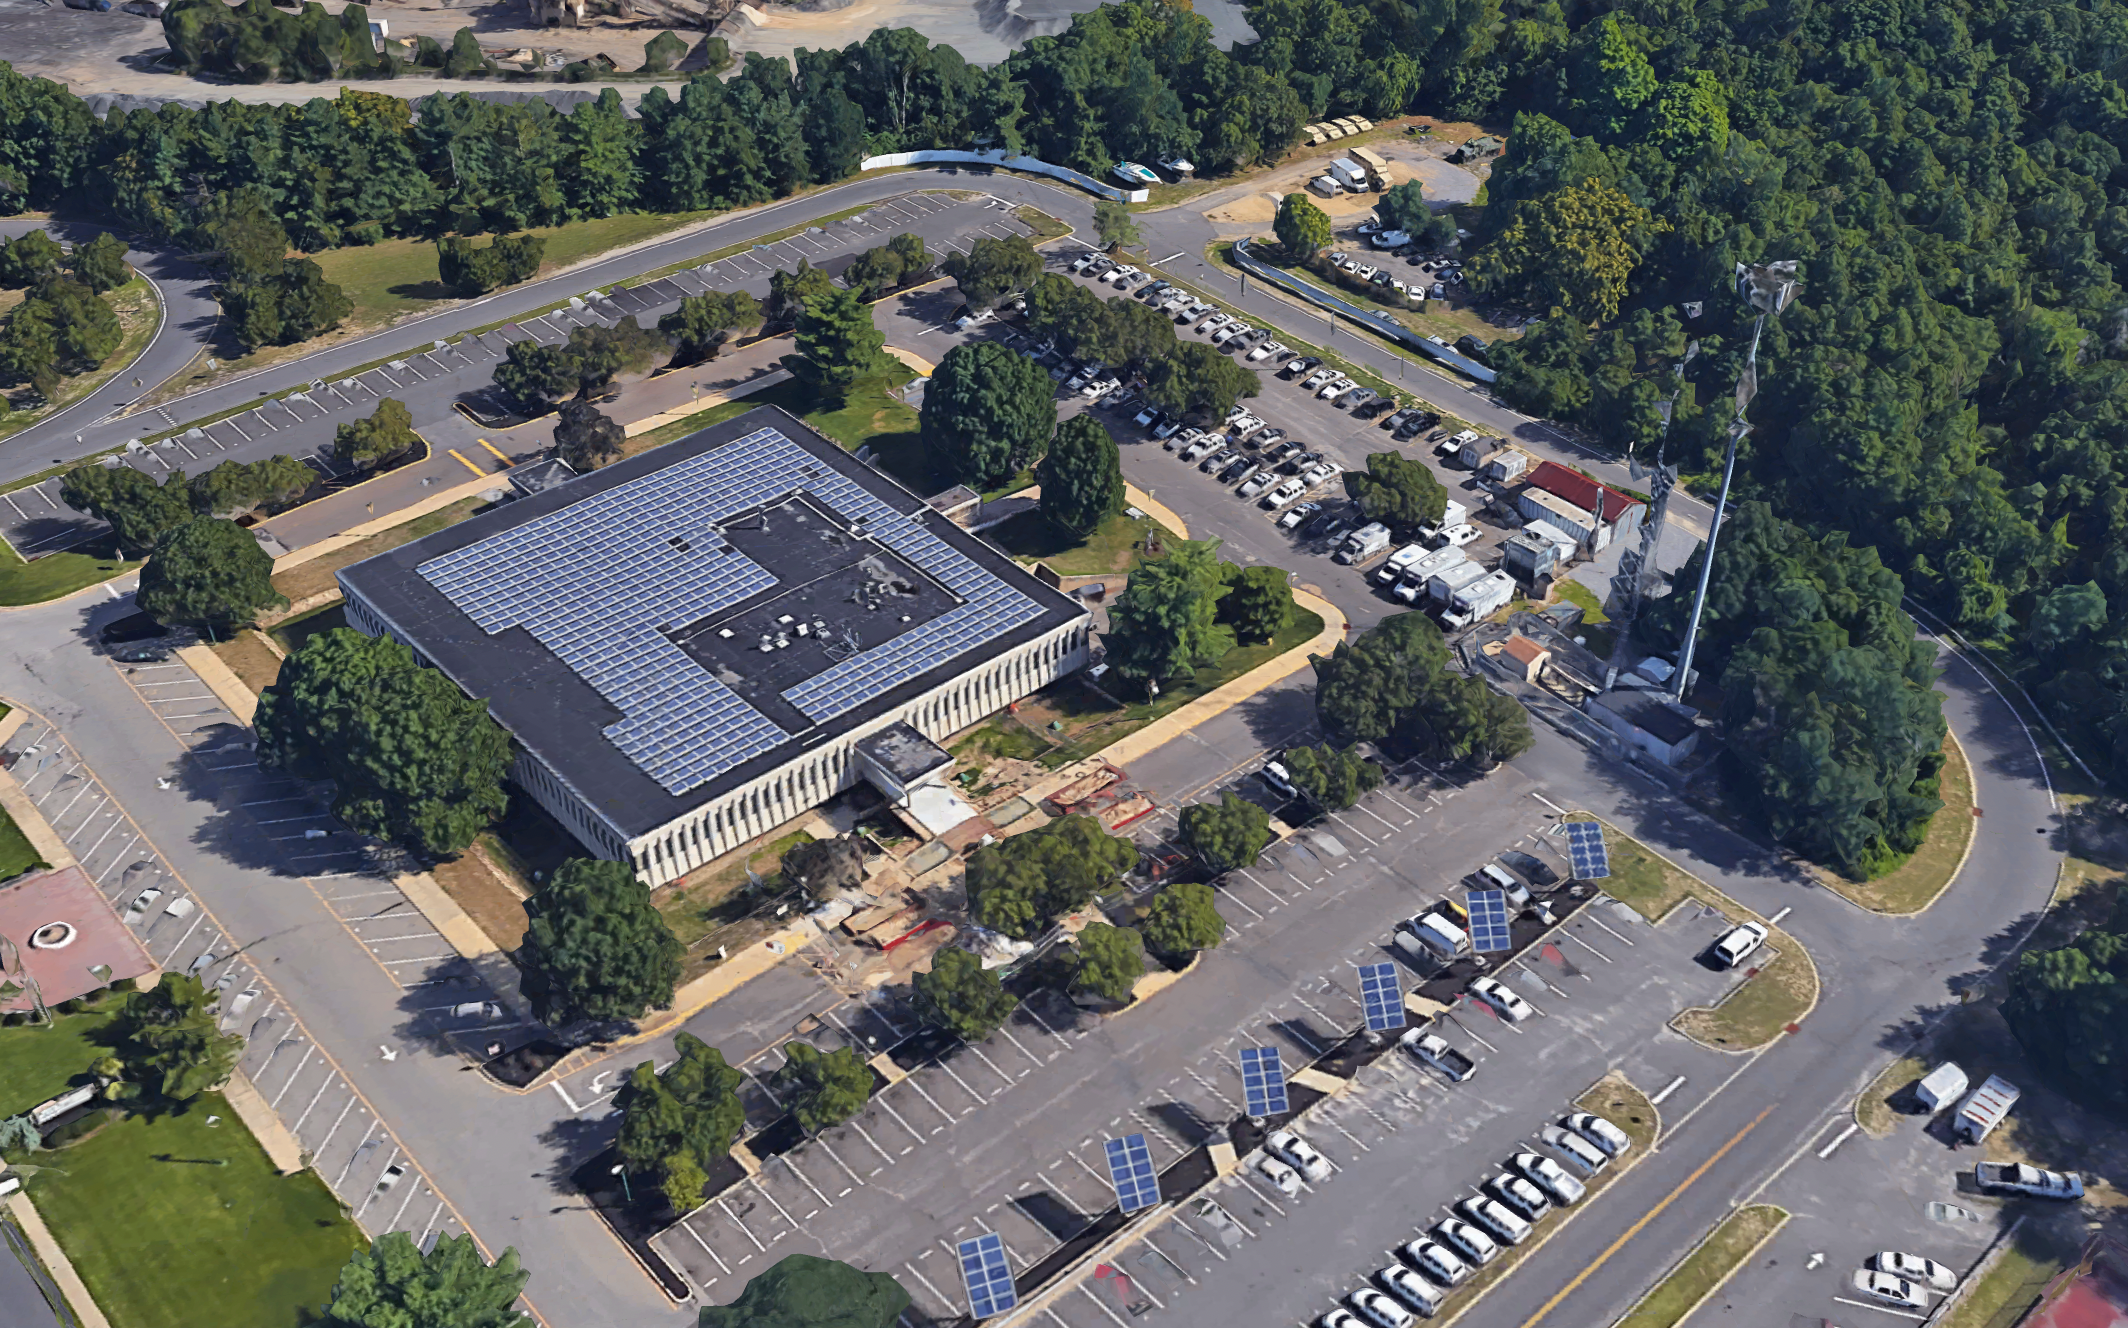 An aerial view of the Brick Township municipal complex, Oct. 2022. (Credit: Google Earth)